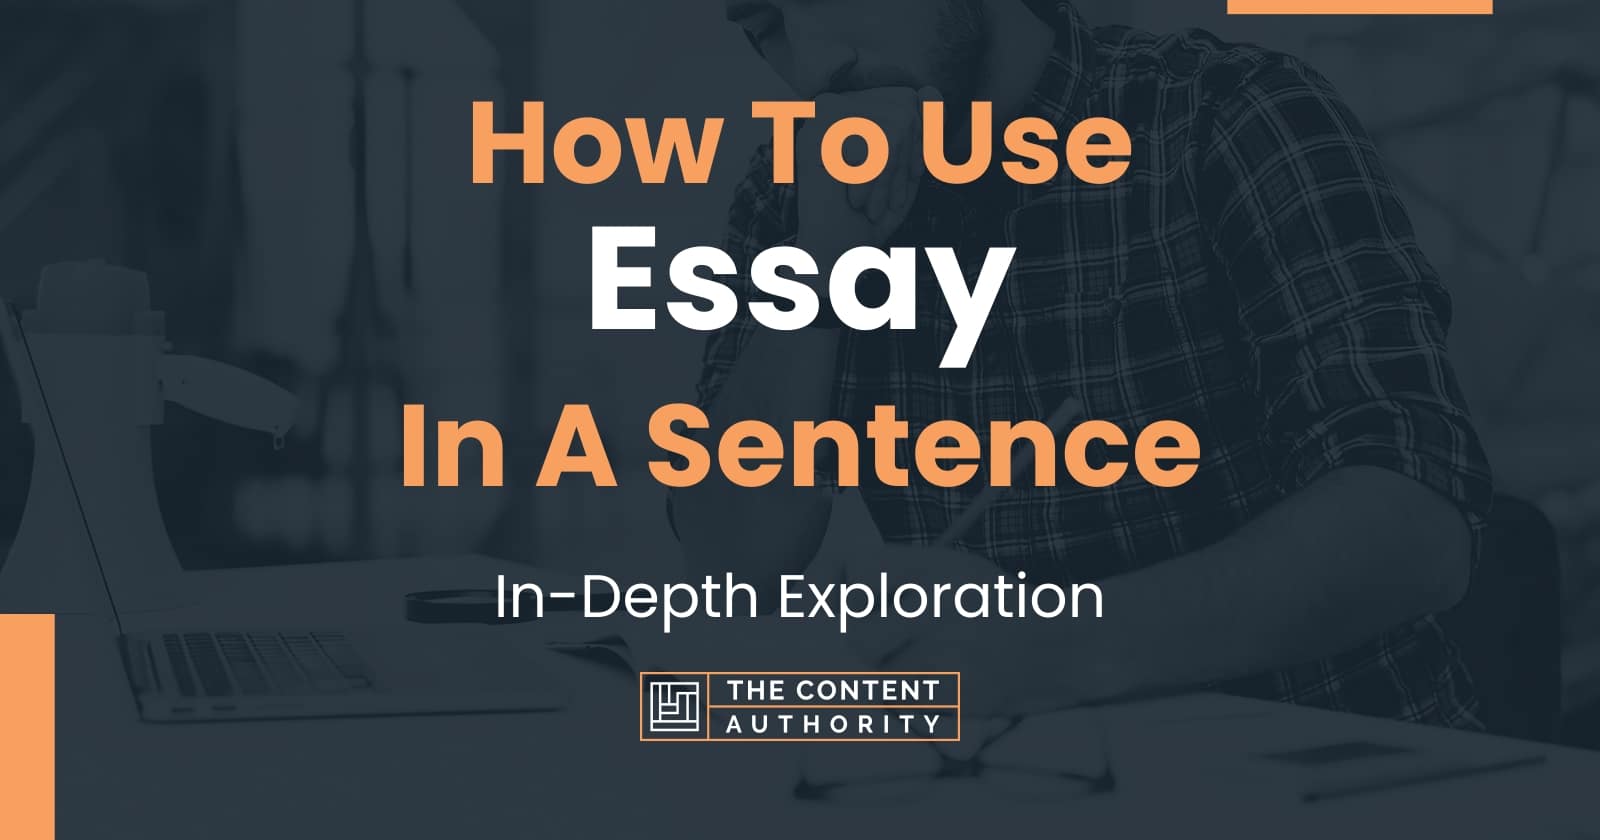 use word essay in a sentence